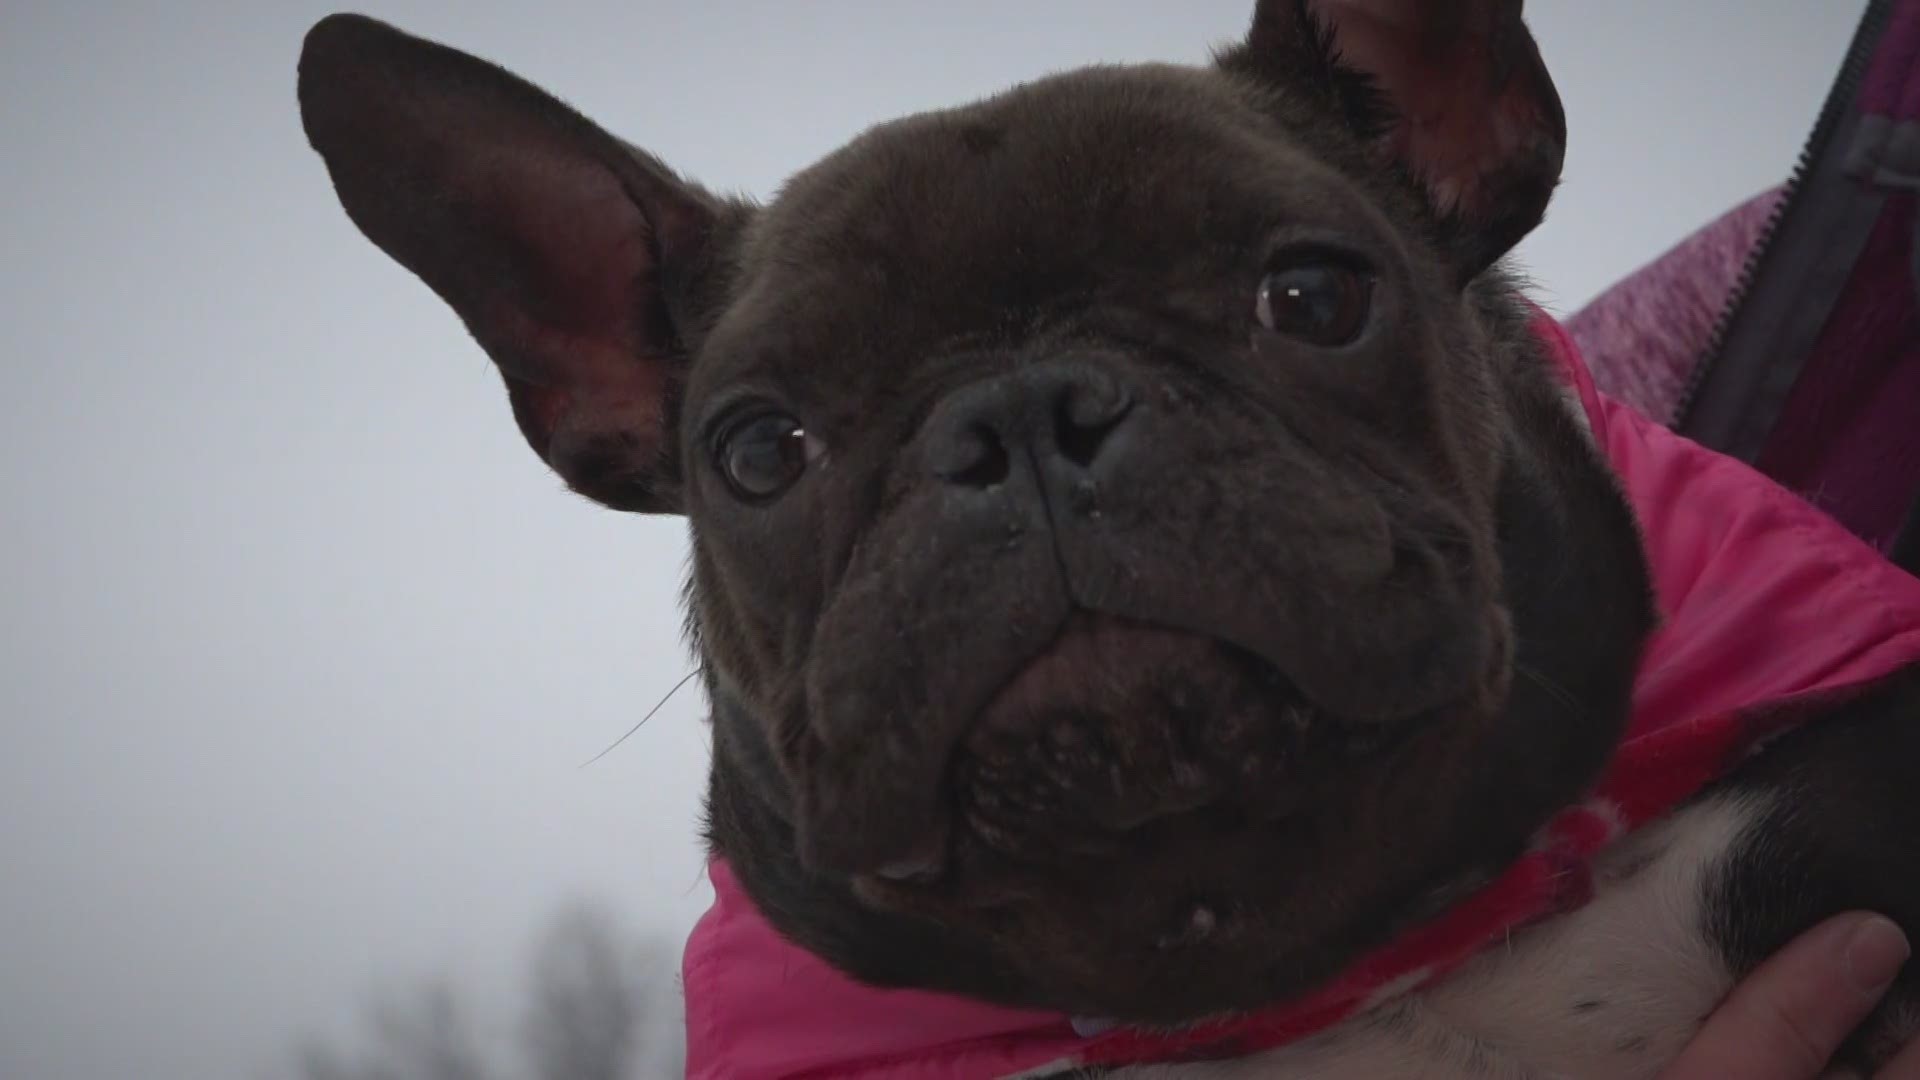 Her foster says Fig the French bulldog's determination is the big reason she's still alive, despite her special needs and the rough way her life began.